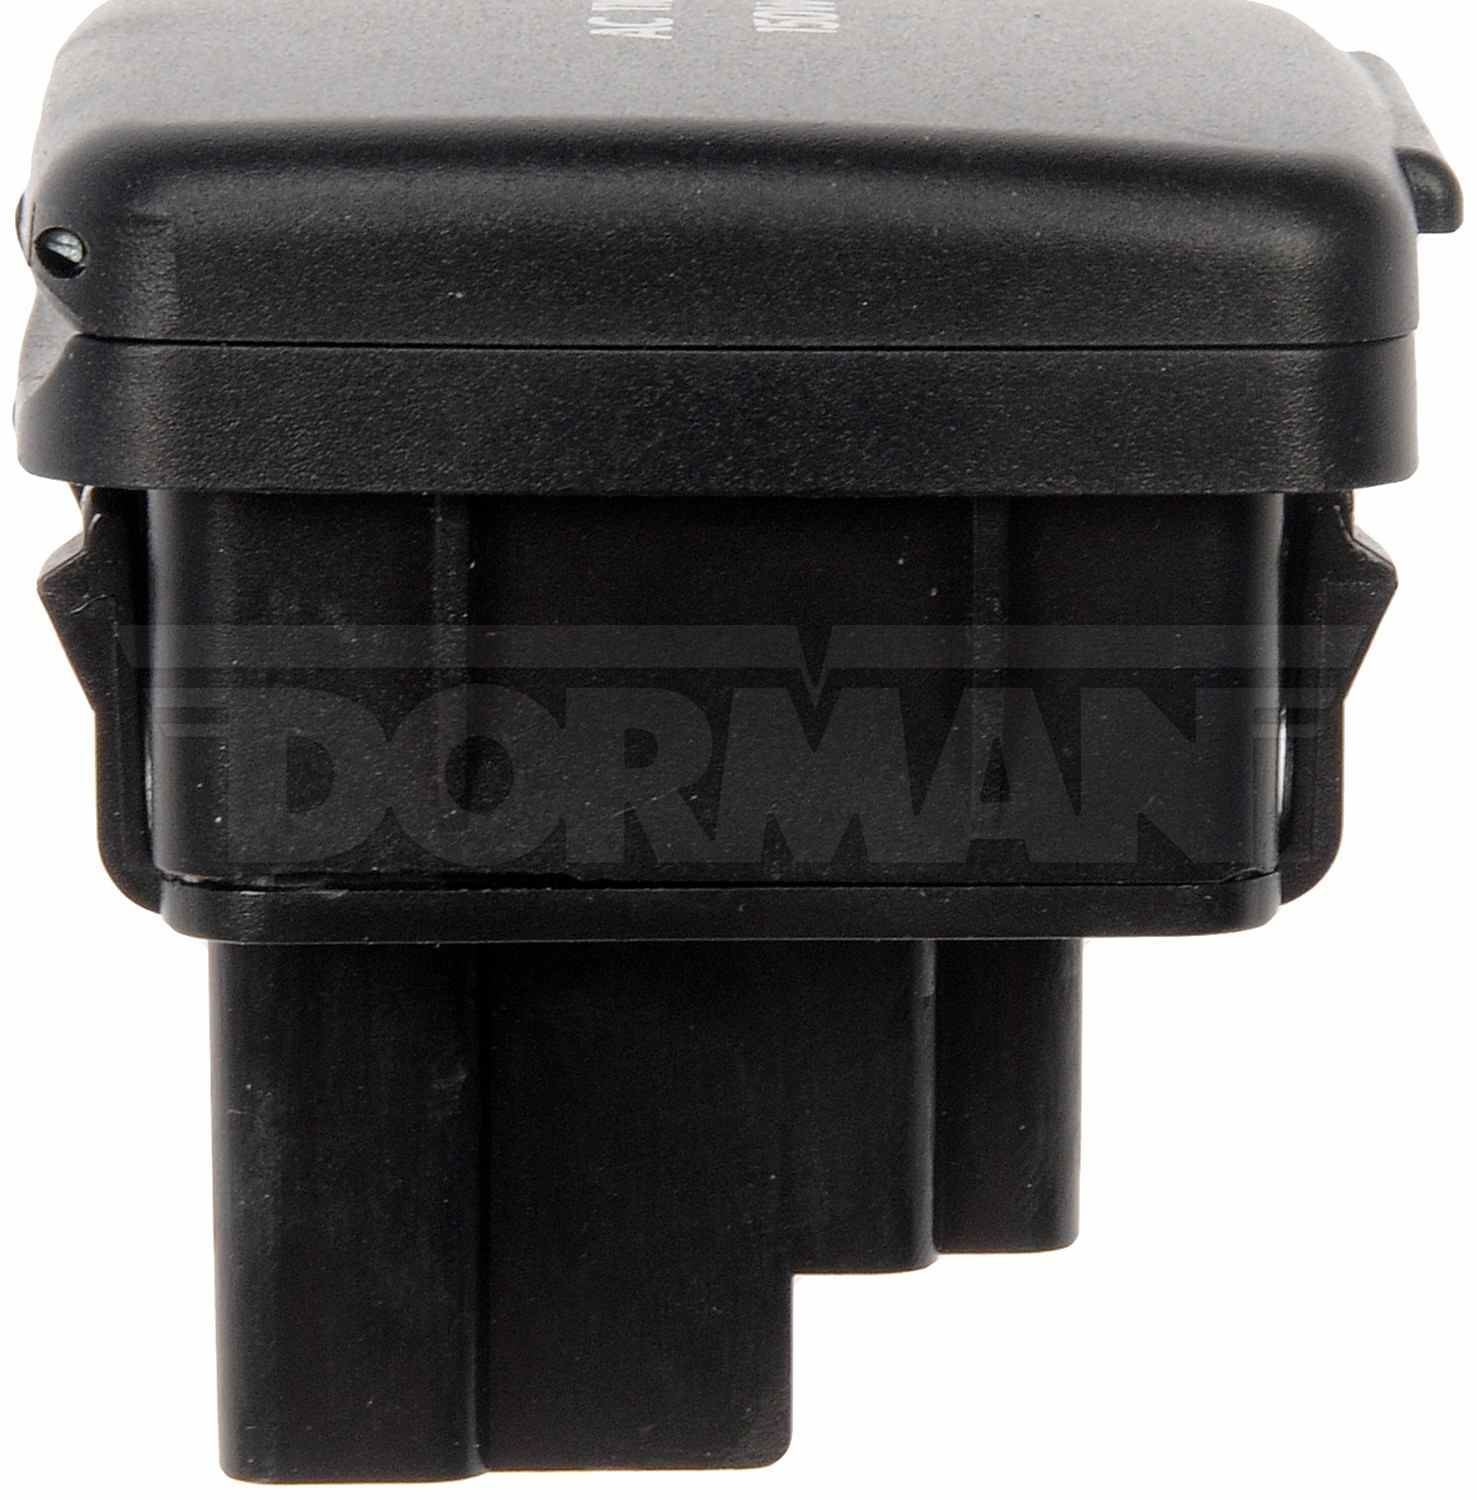 Left View of 110 Volt Accessory Power Outlet MOTORMITE 84942